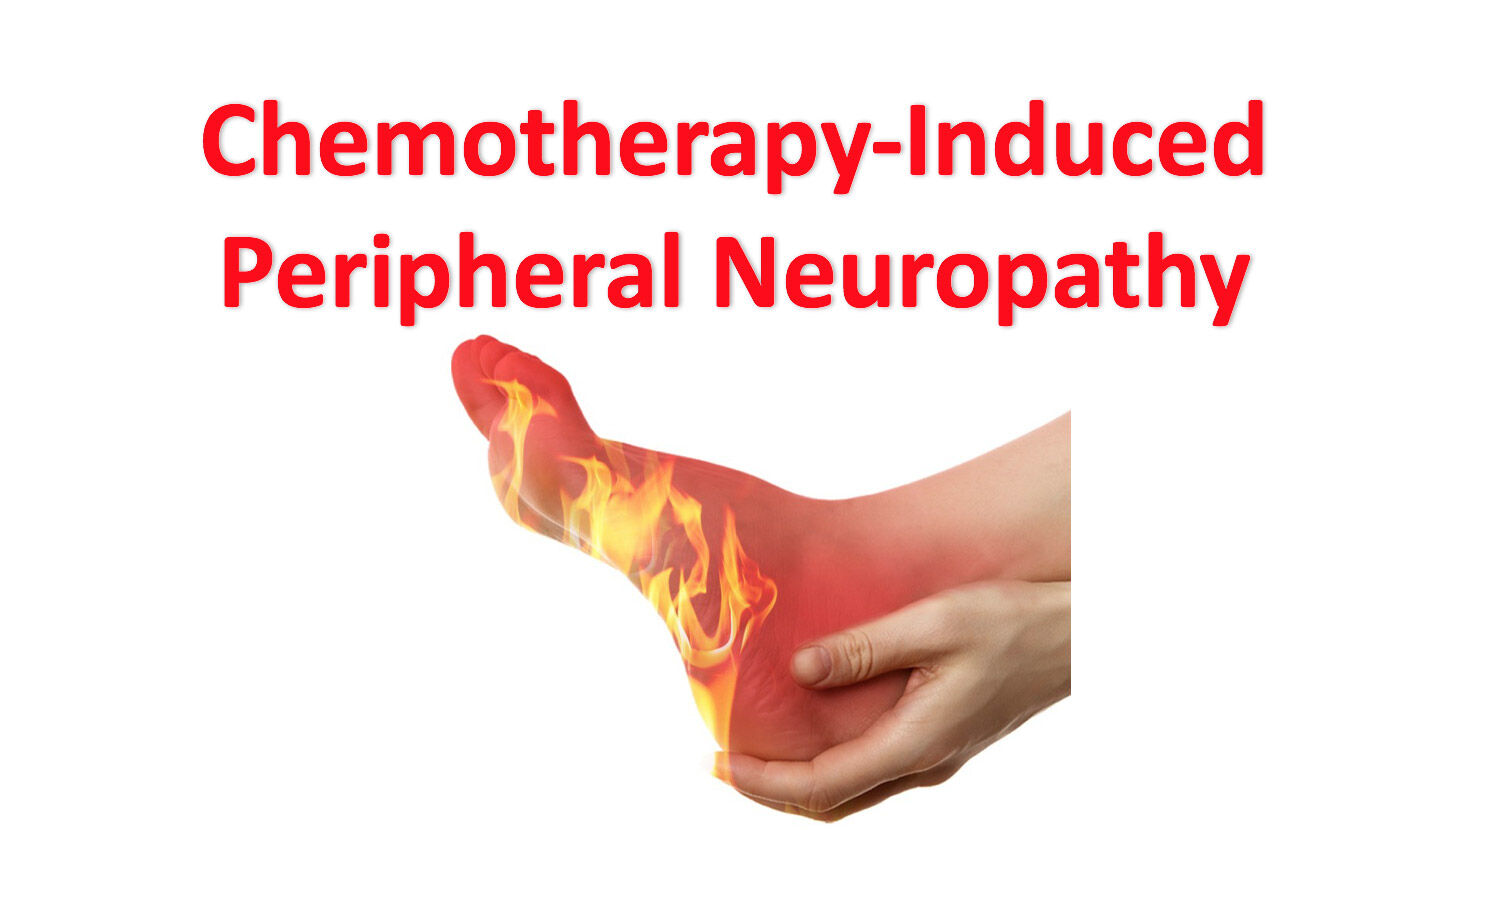 Managing ChemotherapyInduced Peripheral Neuropathy in